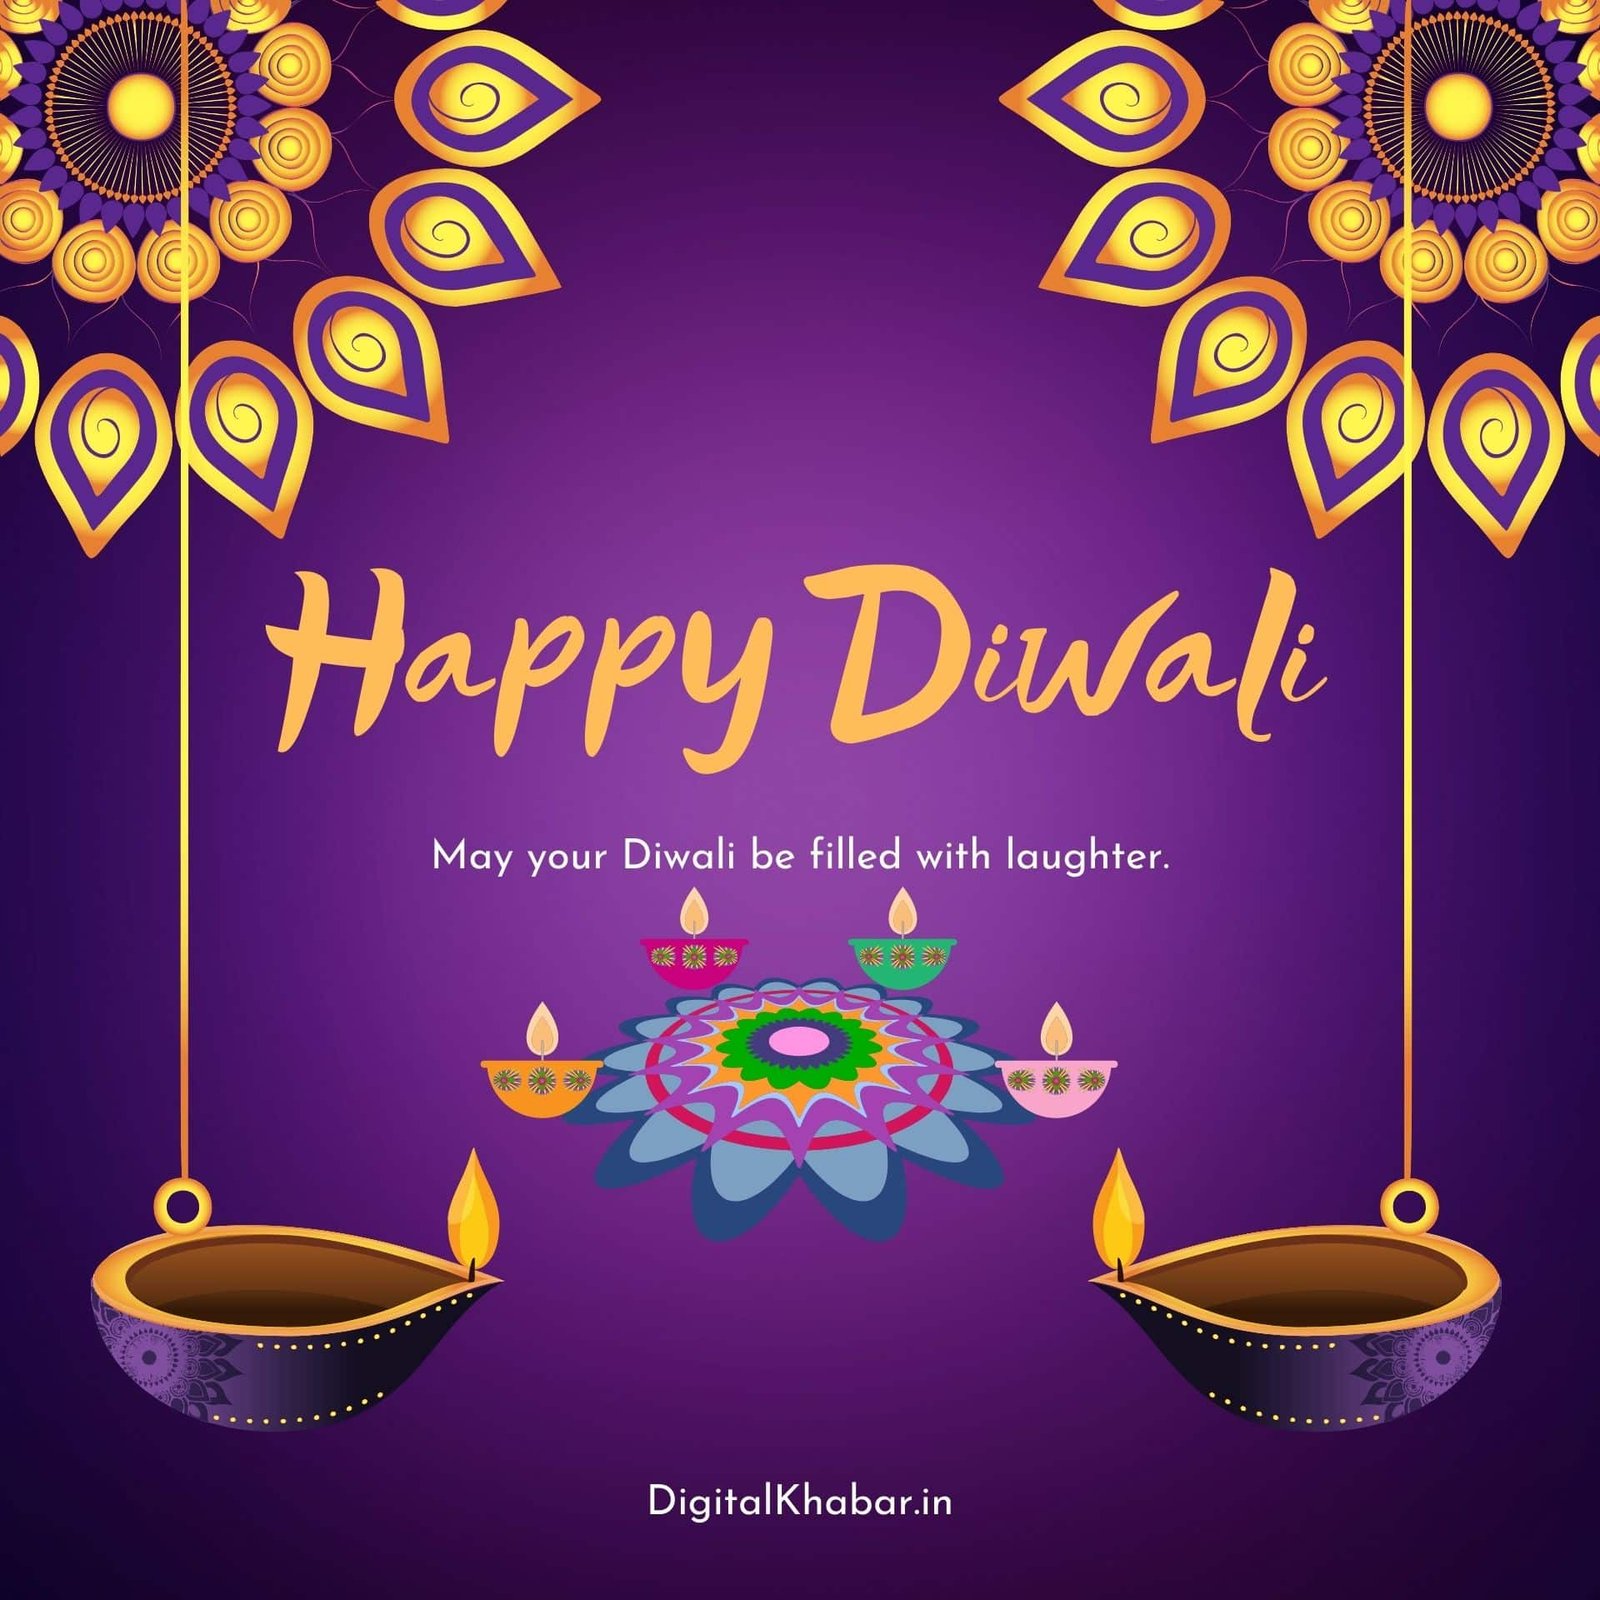 new Happy diwali images hd may your diwali filled with laughter